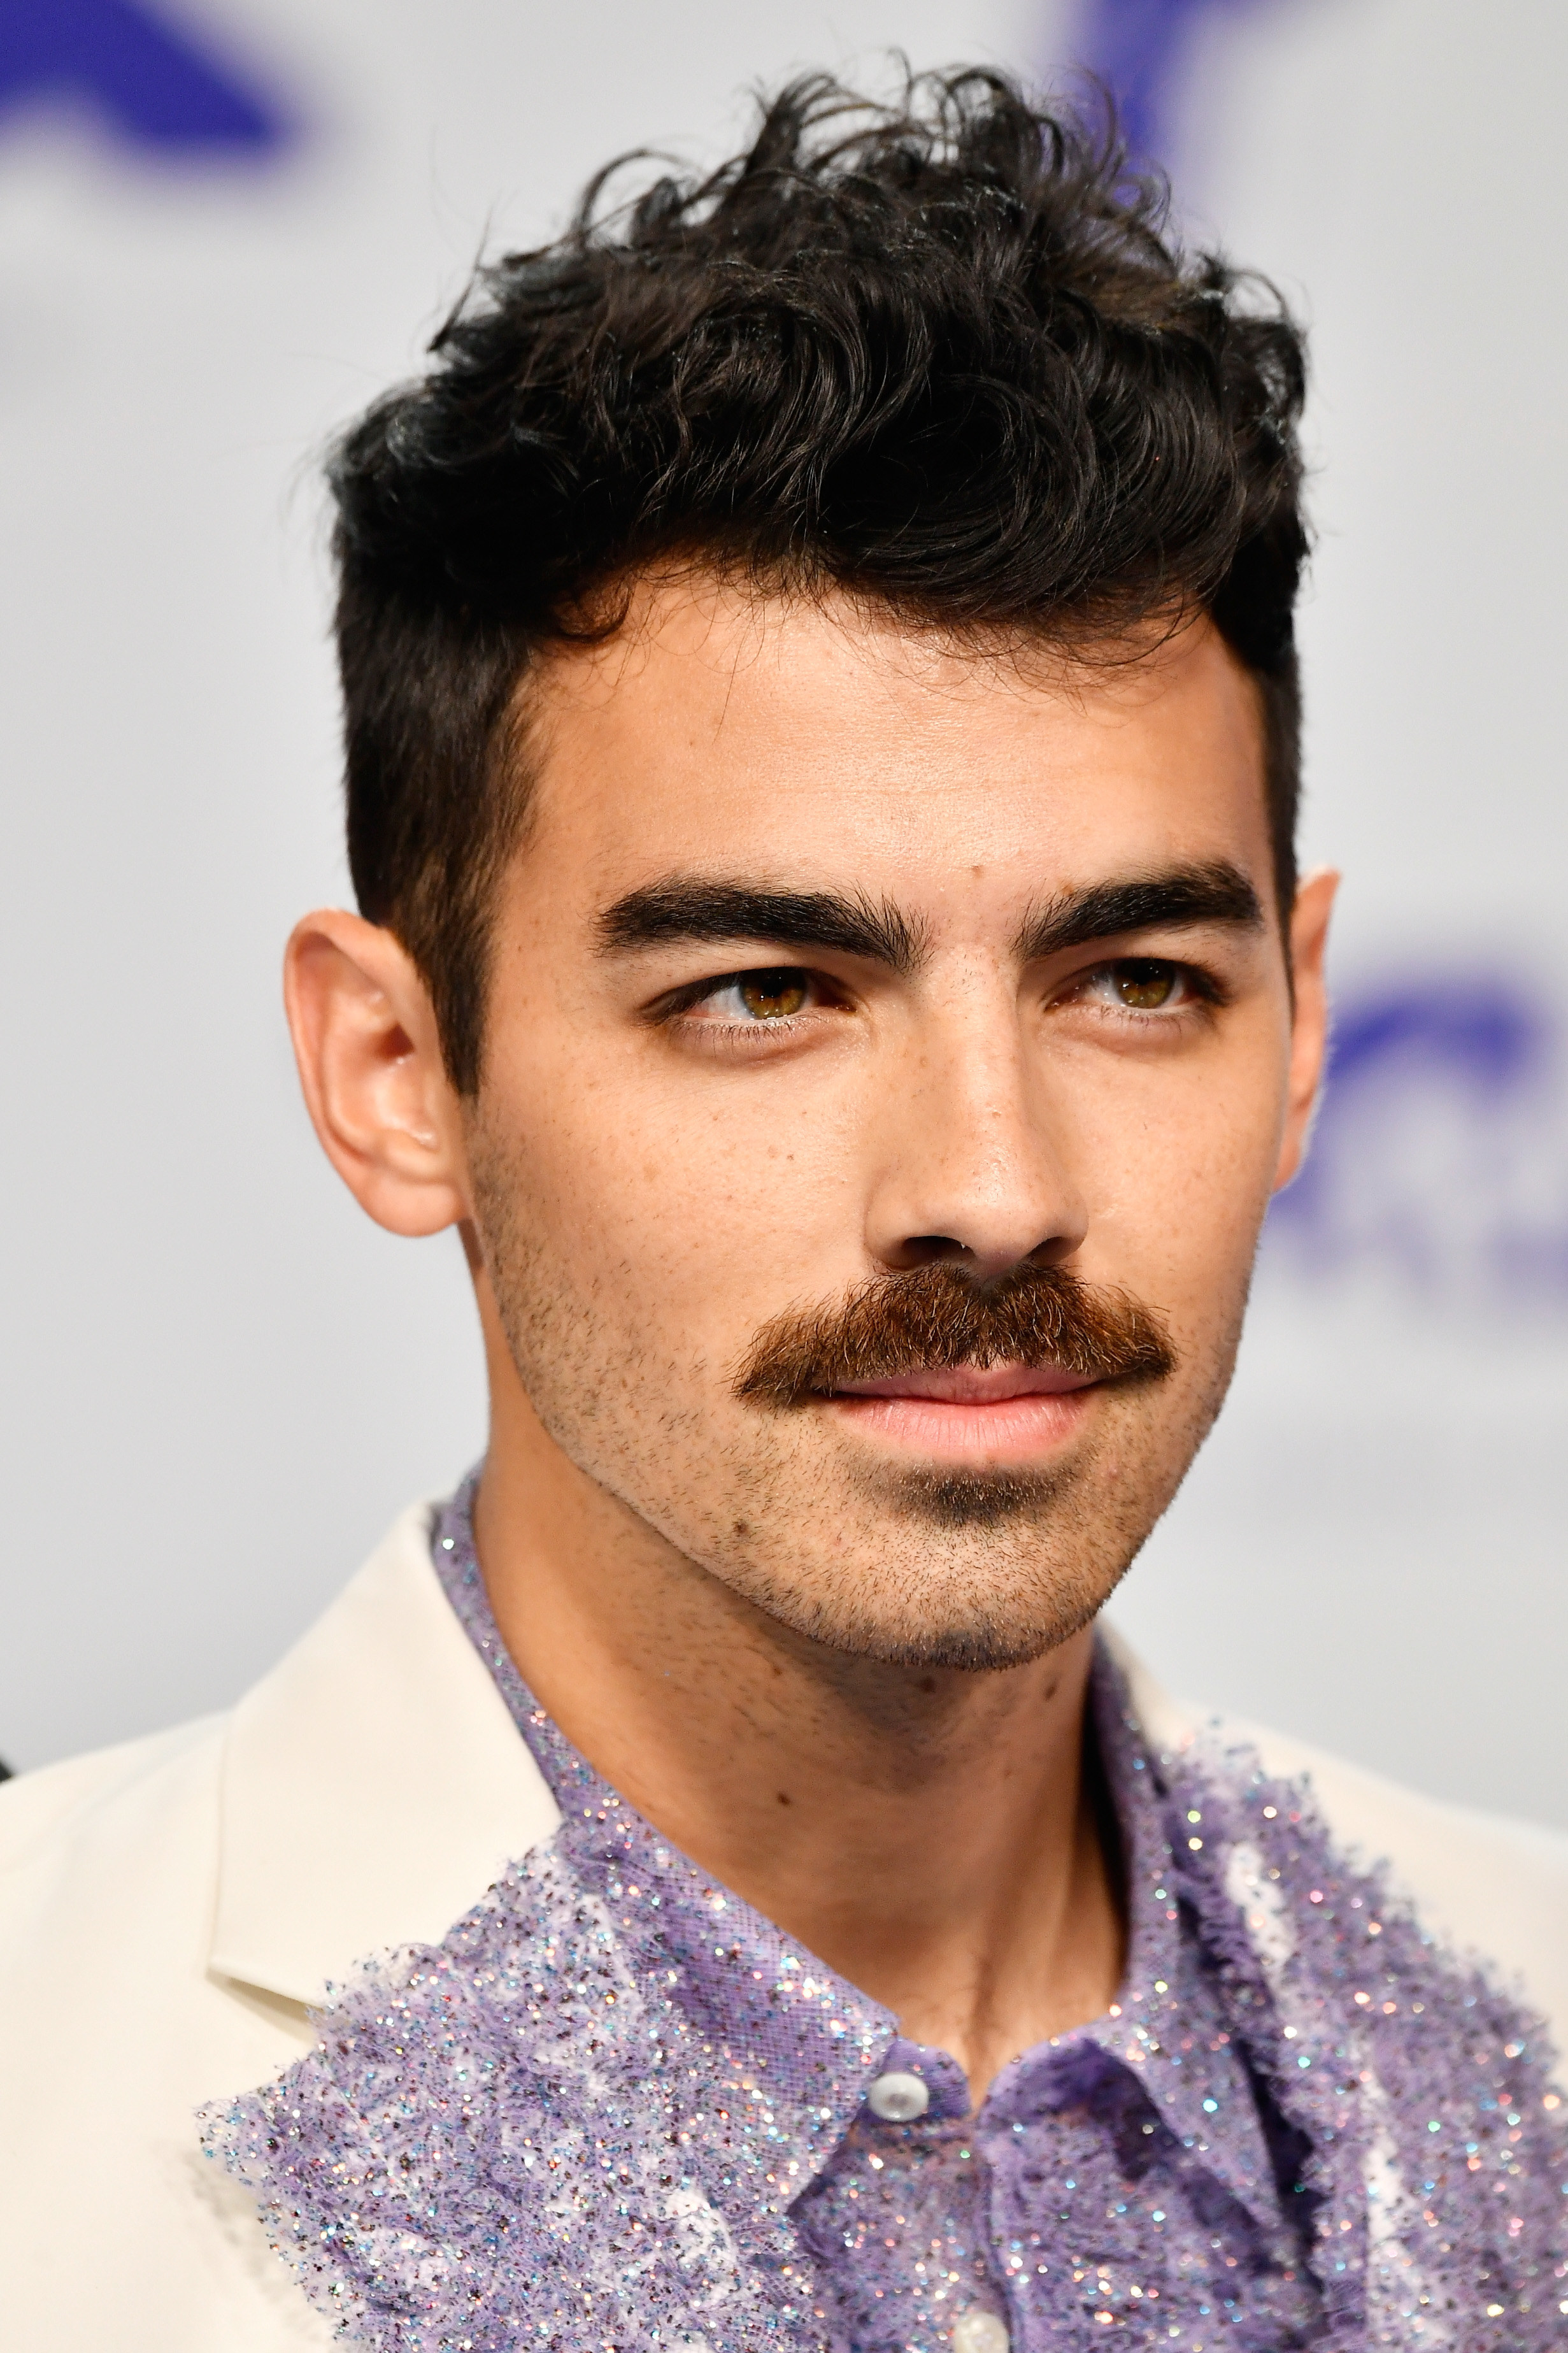 oe Jonas of DNCE attends the 2017 MTV Video Music Awards at The Forum